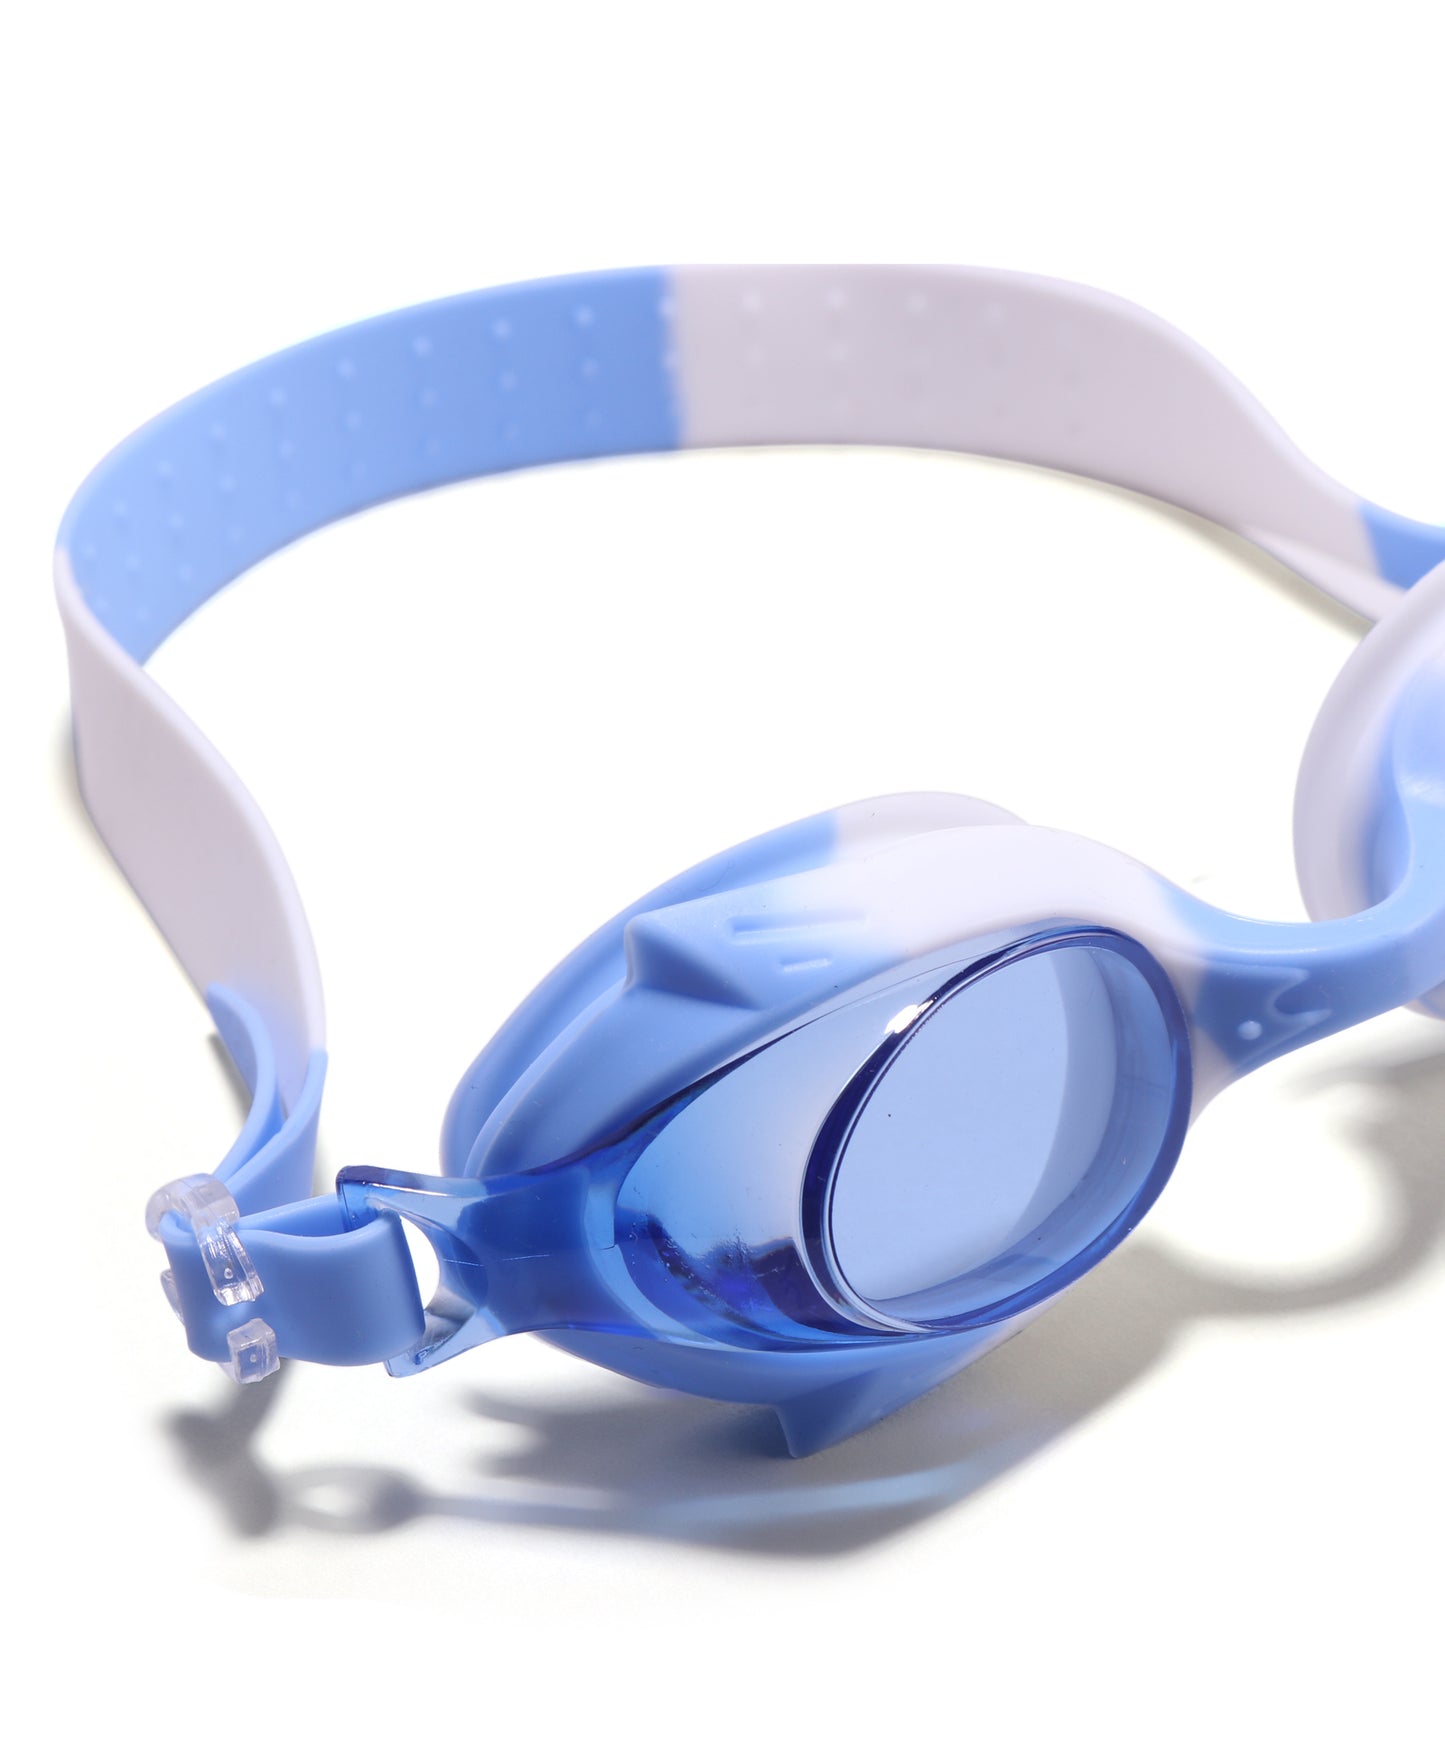 DUAL SHADED SWIMMING GOGGLES - BLUE & WHITE